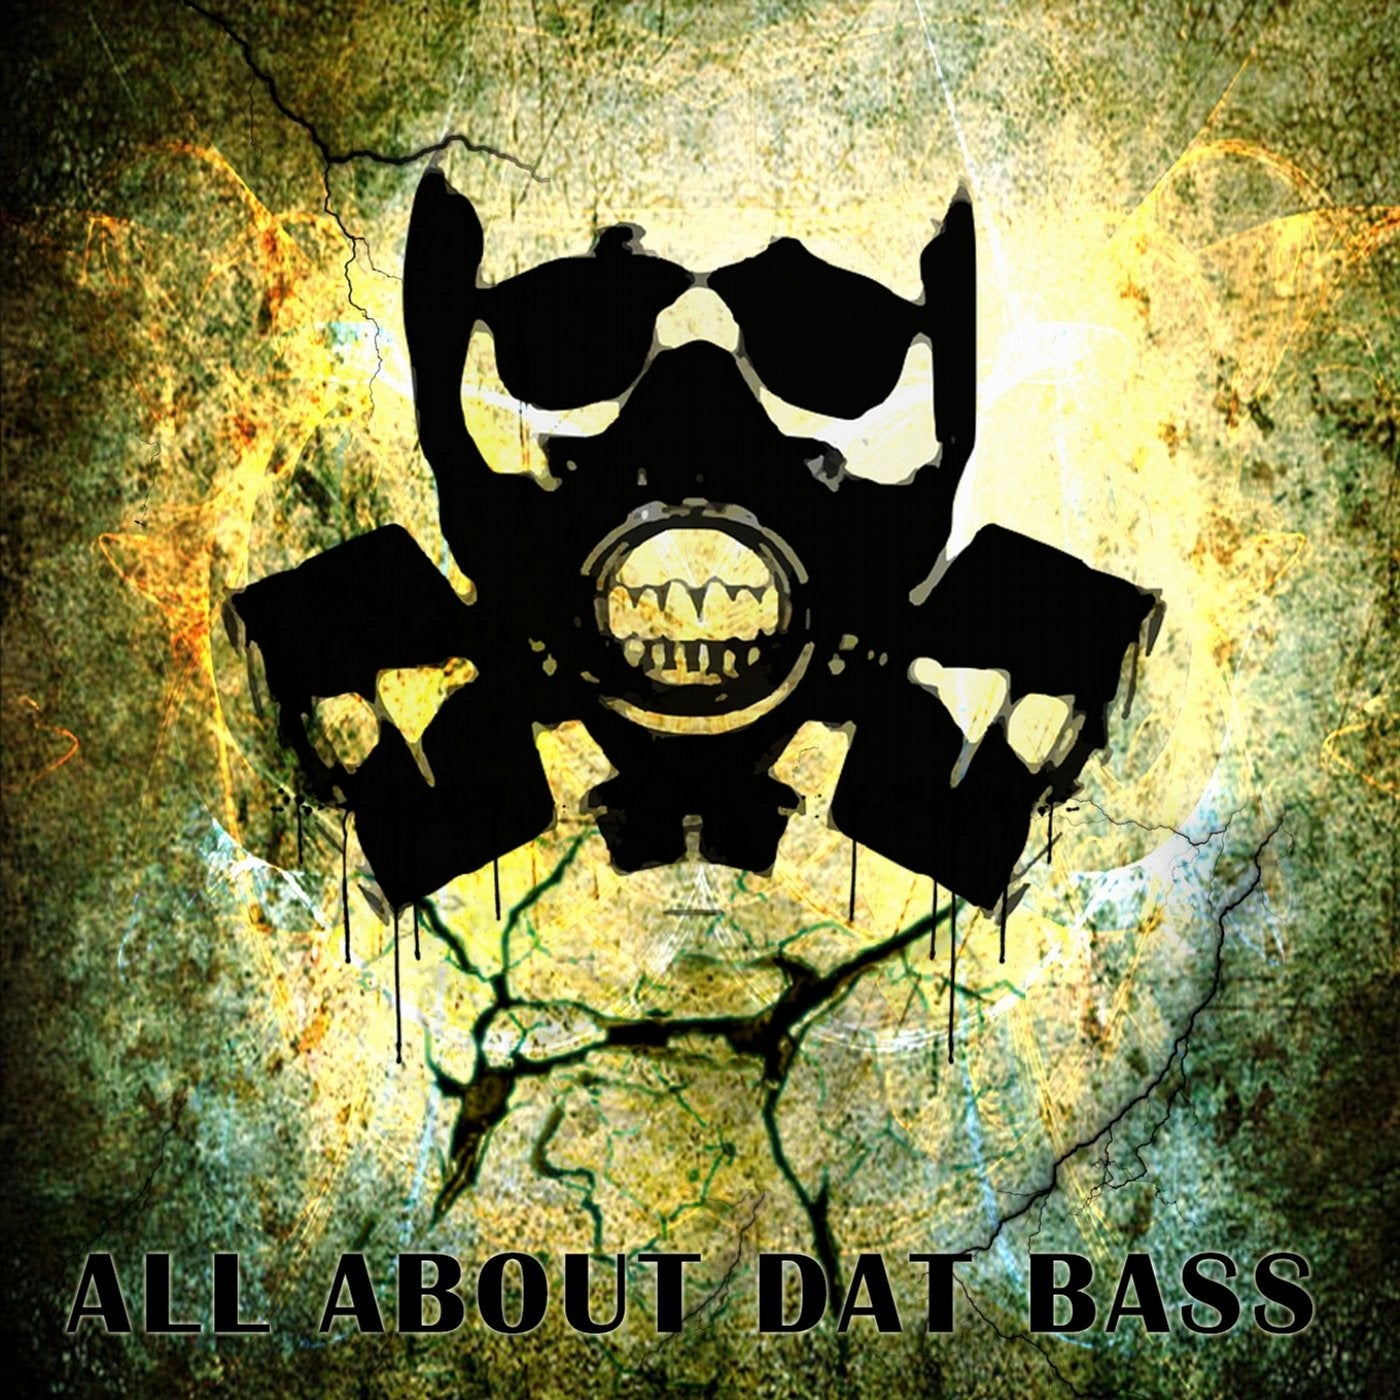 All About Dat Bass